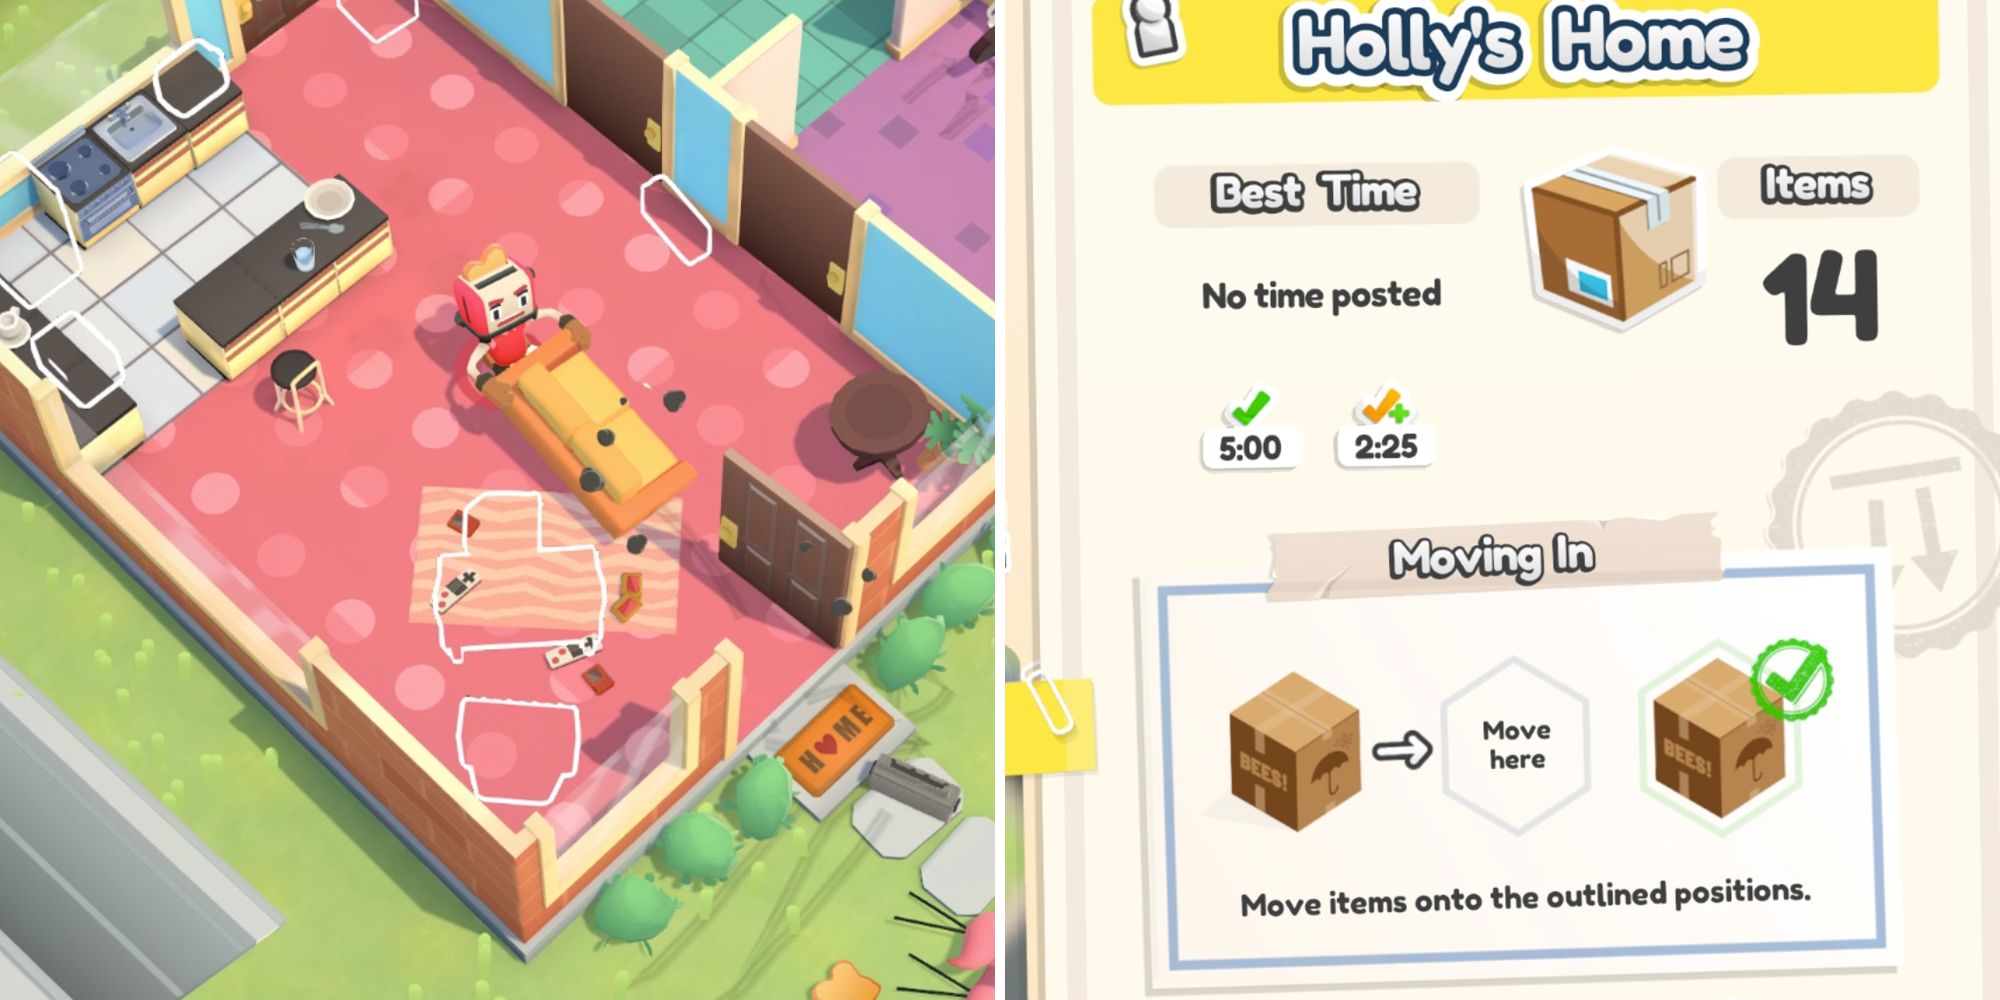 moving out split image. left is character moving sofa, right is info about moving in mode.